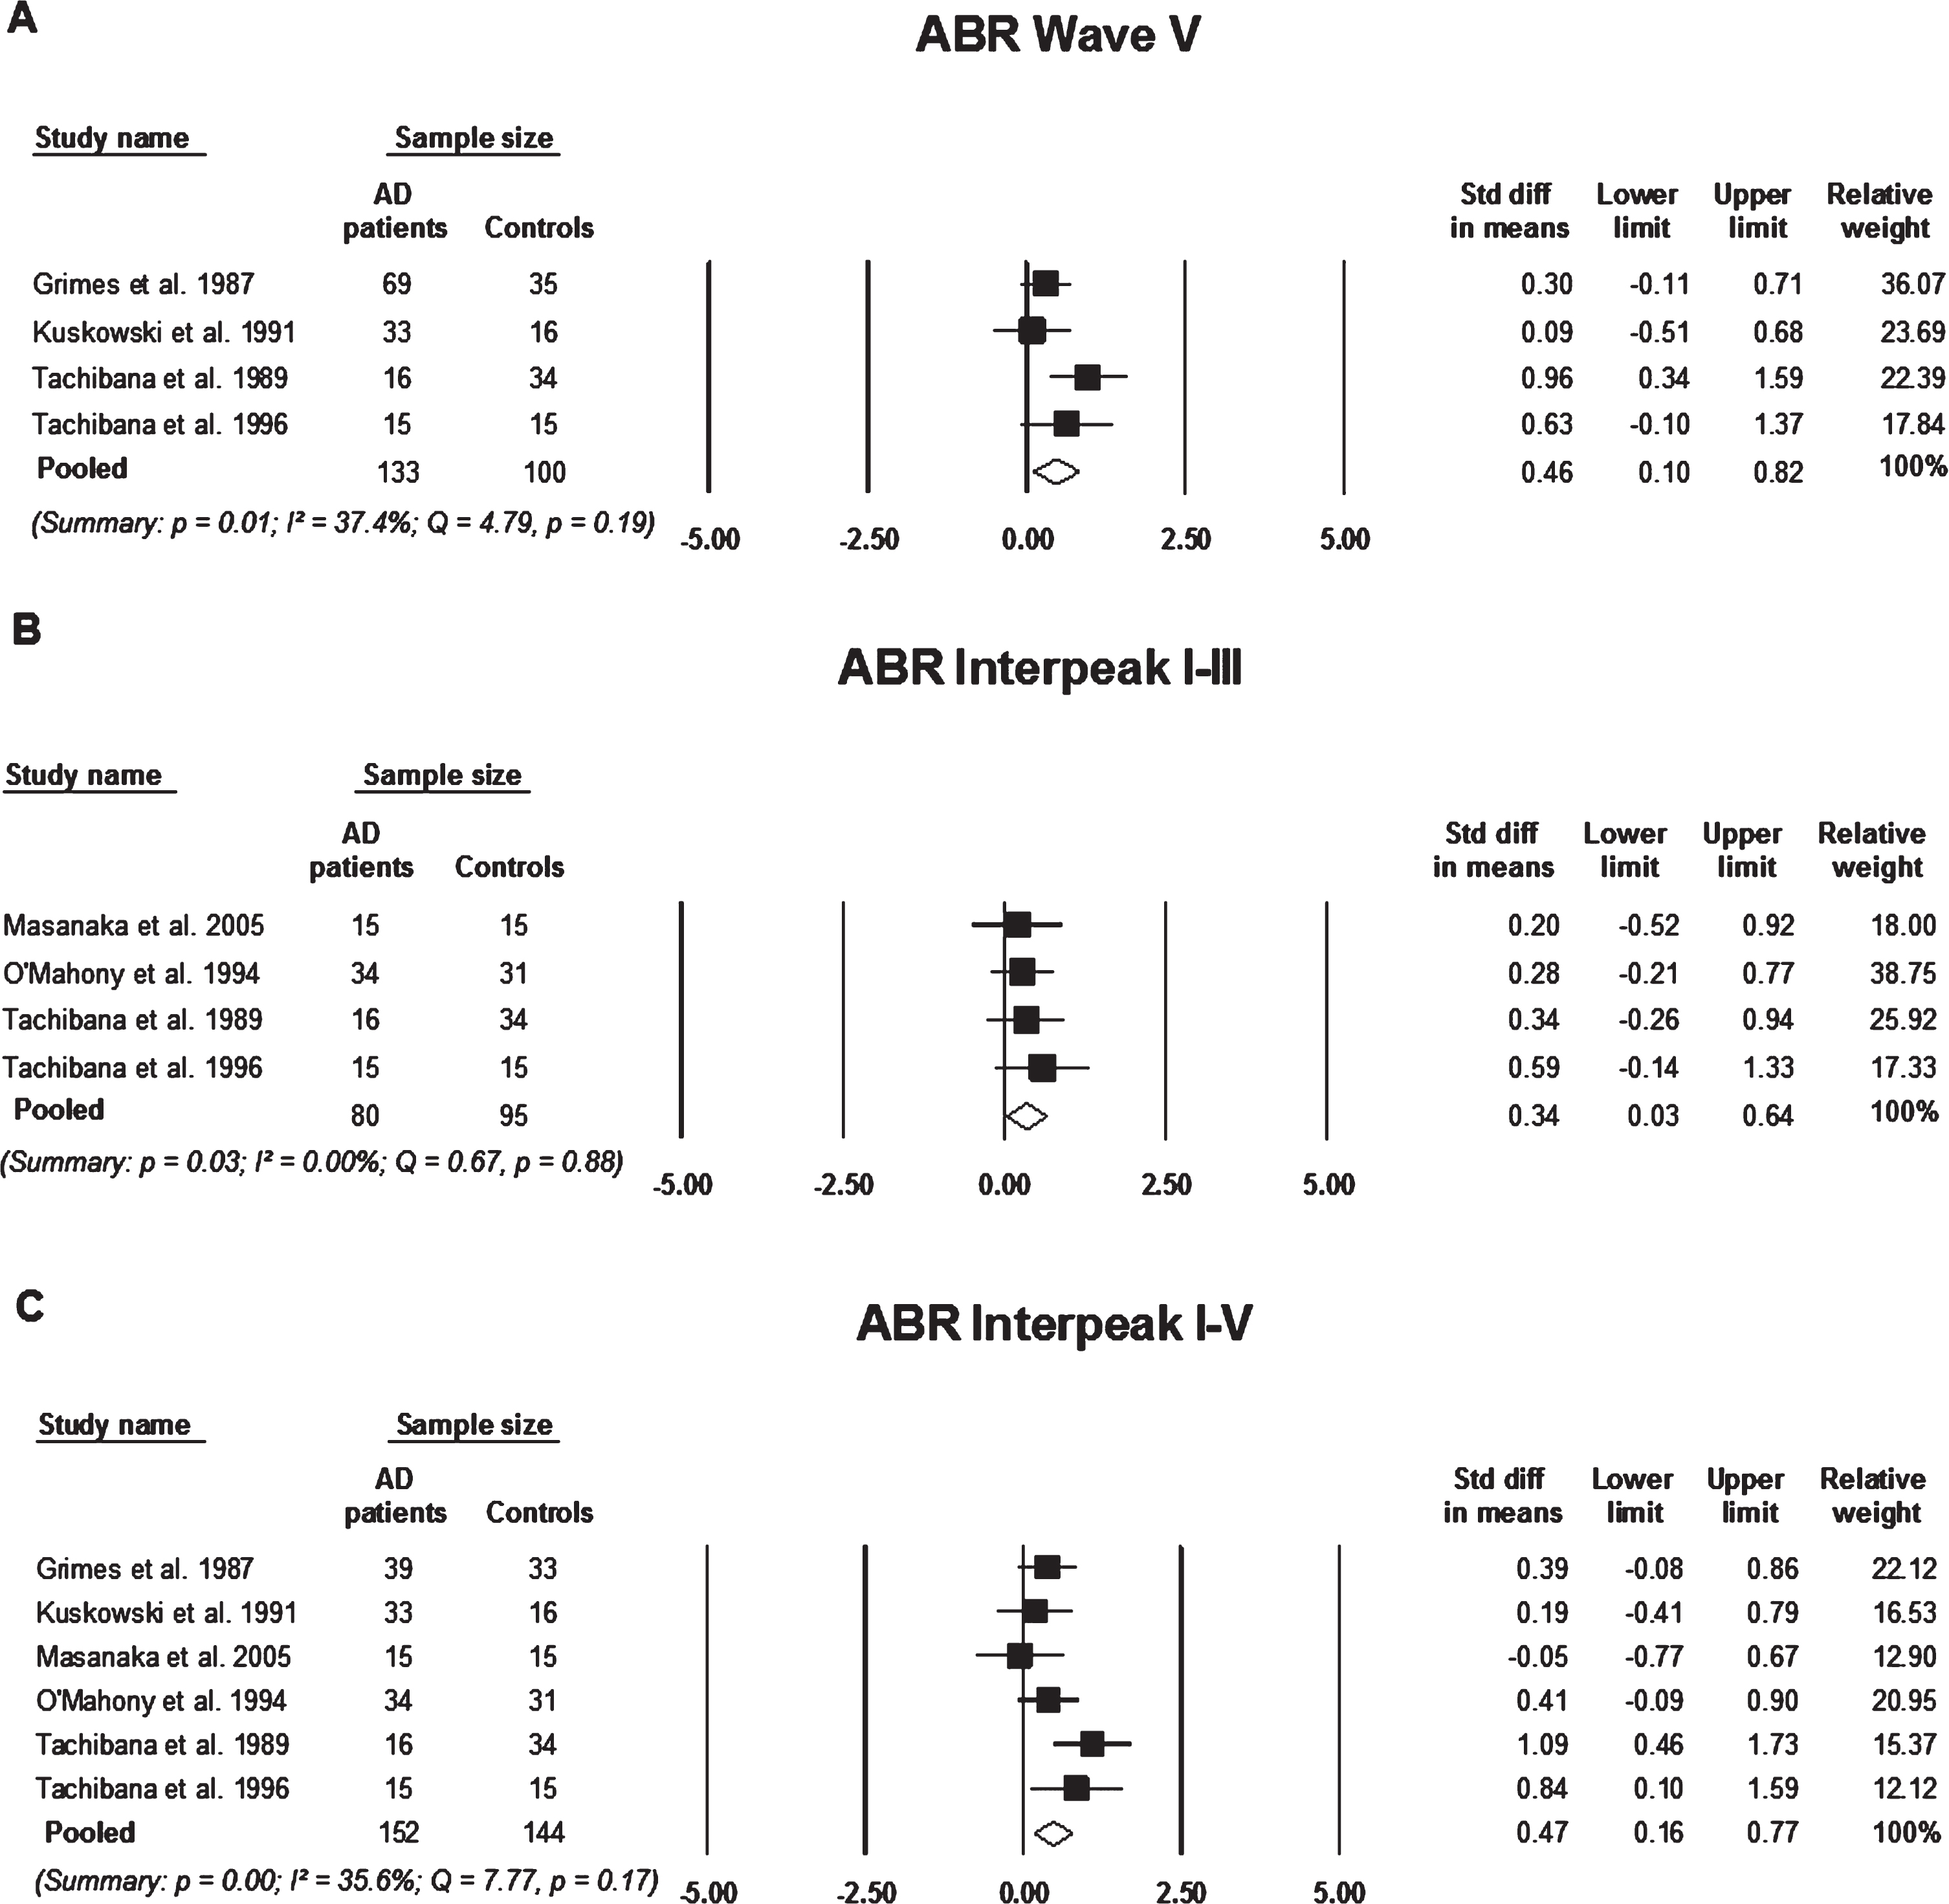 Standard mean difference and pooled estimated of each study included in the meta-analyses of auditory brainstem responses (ABR) elicited using the passive rarefaction click paradigm. All the analyses compare participants with Alzheimer’s disease (AD) to controls A) analysis of ABR wave V latency, B) analysis of ABR interpeak wave I-III, and C) analysis of ABR interpeak wave I-V. Summary includes: p = significance level; I2 = percentage of heterogeneity; Q = Cochrane’s Q. The horizontal lines represent the 95%confidence interval for each computed standard mean difference. Note: weights are from random effects analysis.